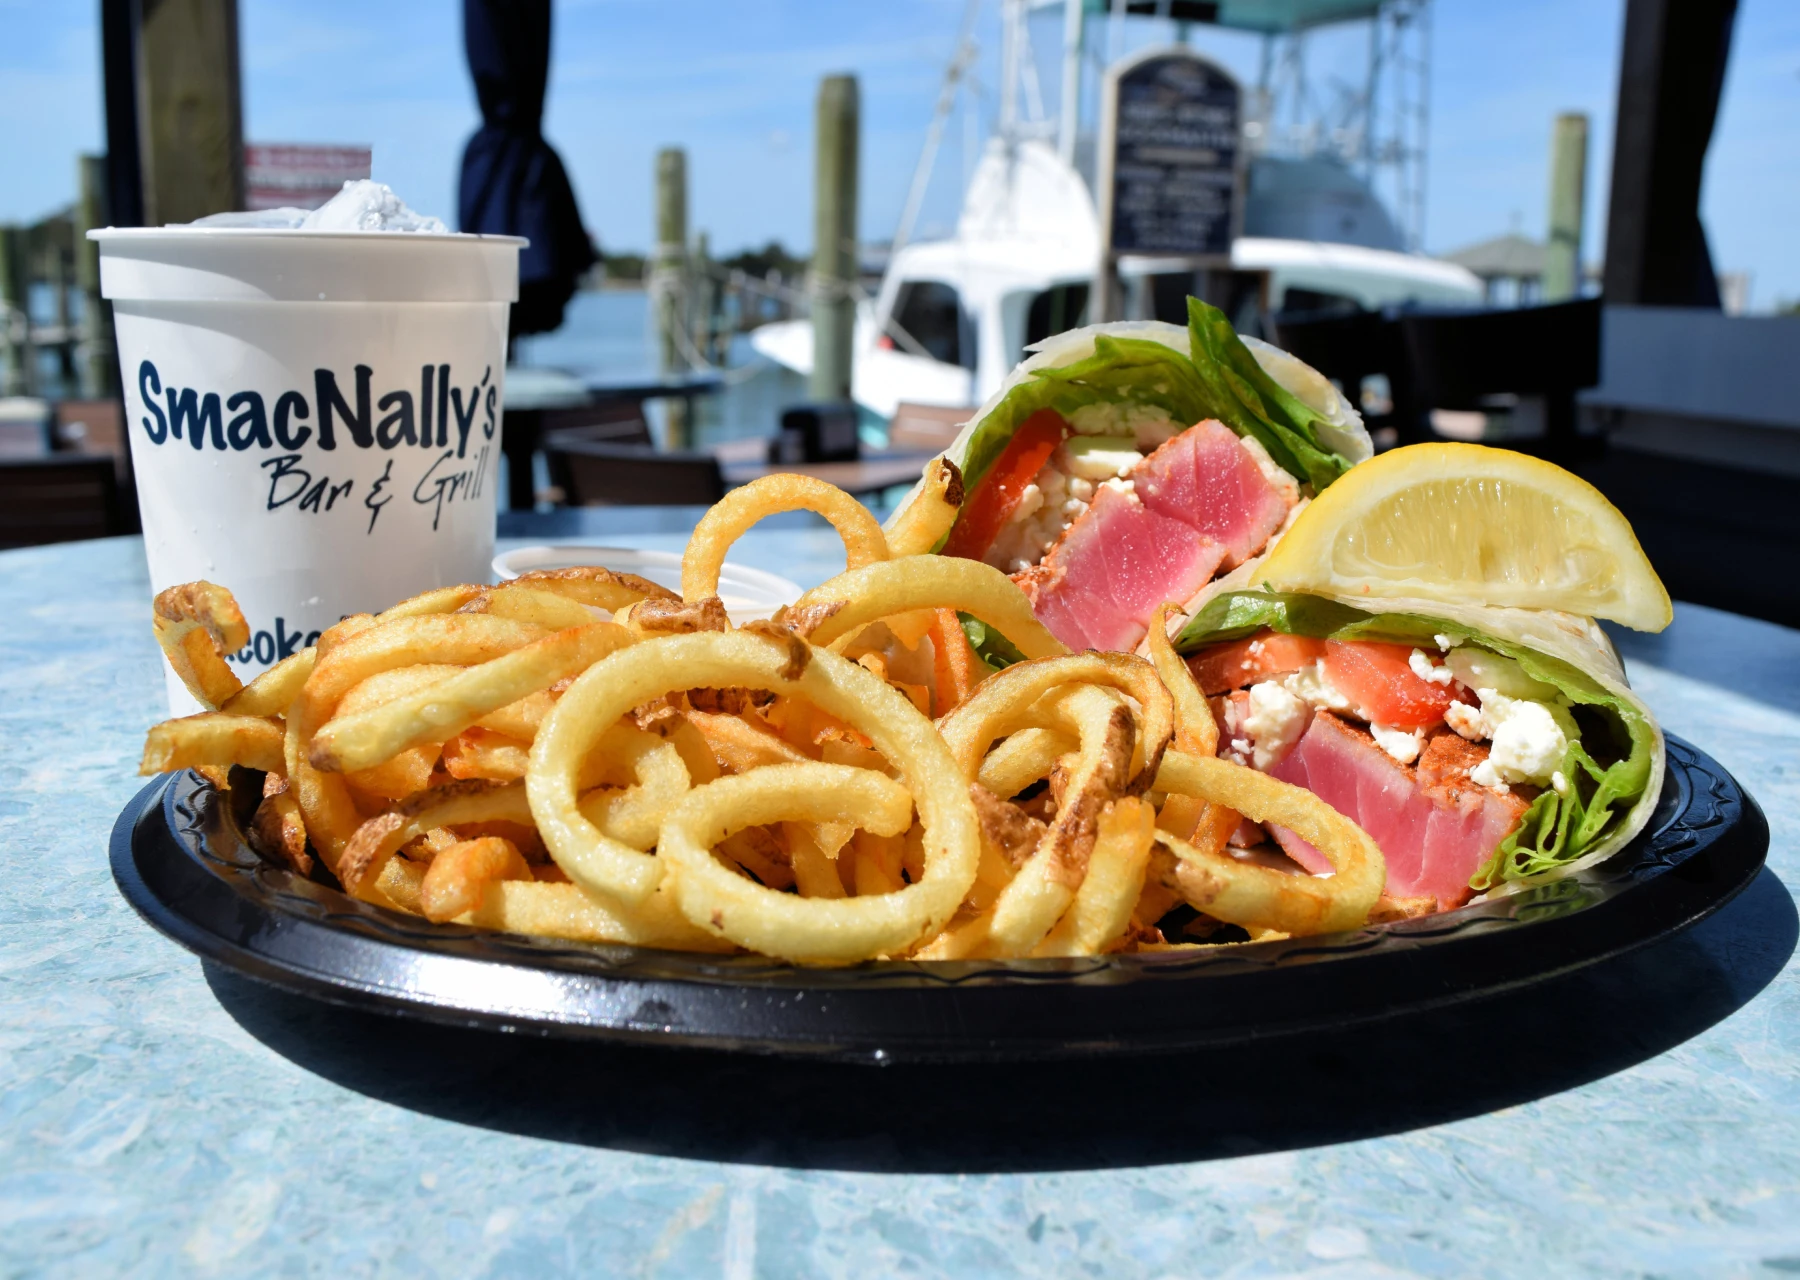 Ahi Tuna Sandwich Wrap with Curly Fries at SmacNallys Waterfront Bar and Grill - Hero